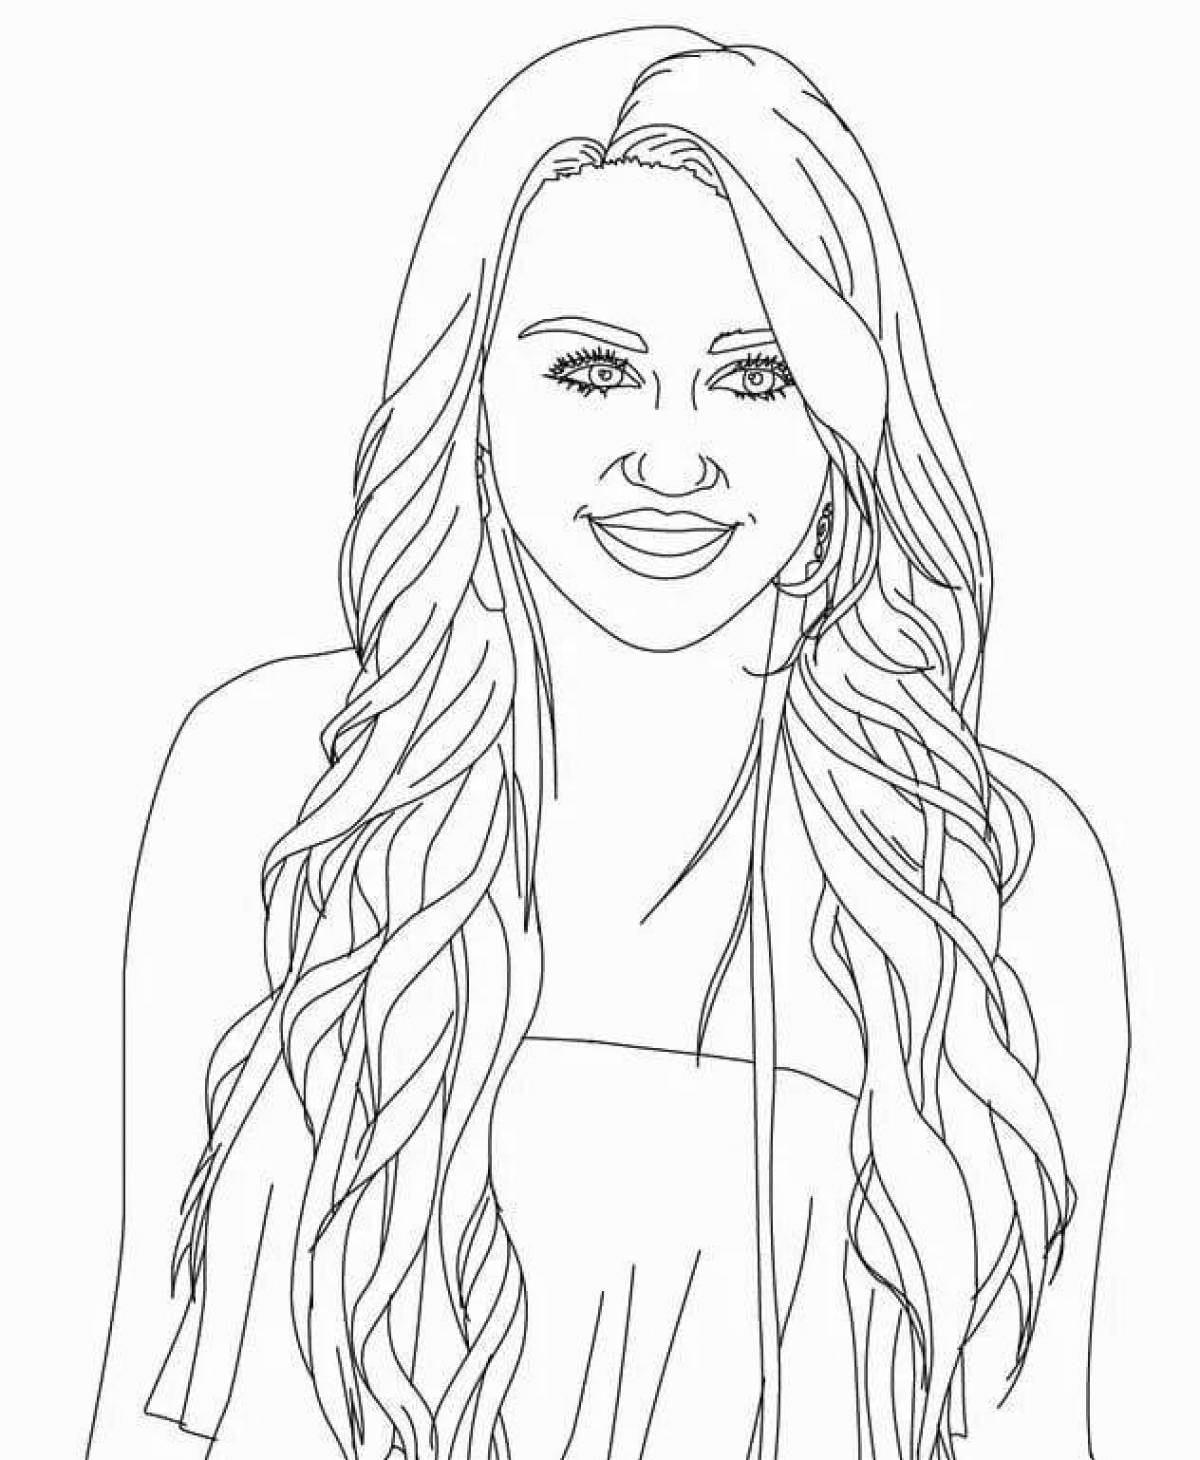 Coloring page of a girl with long hair